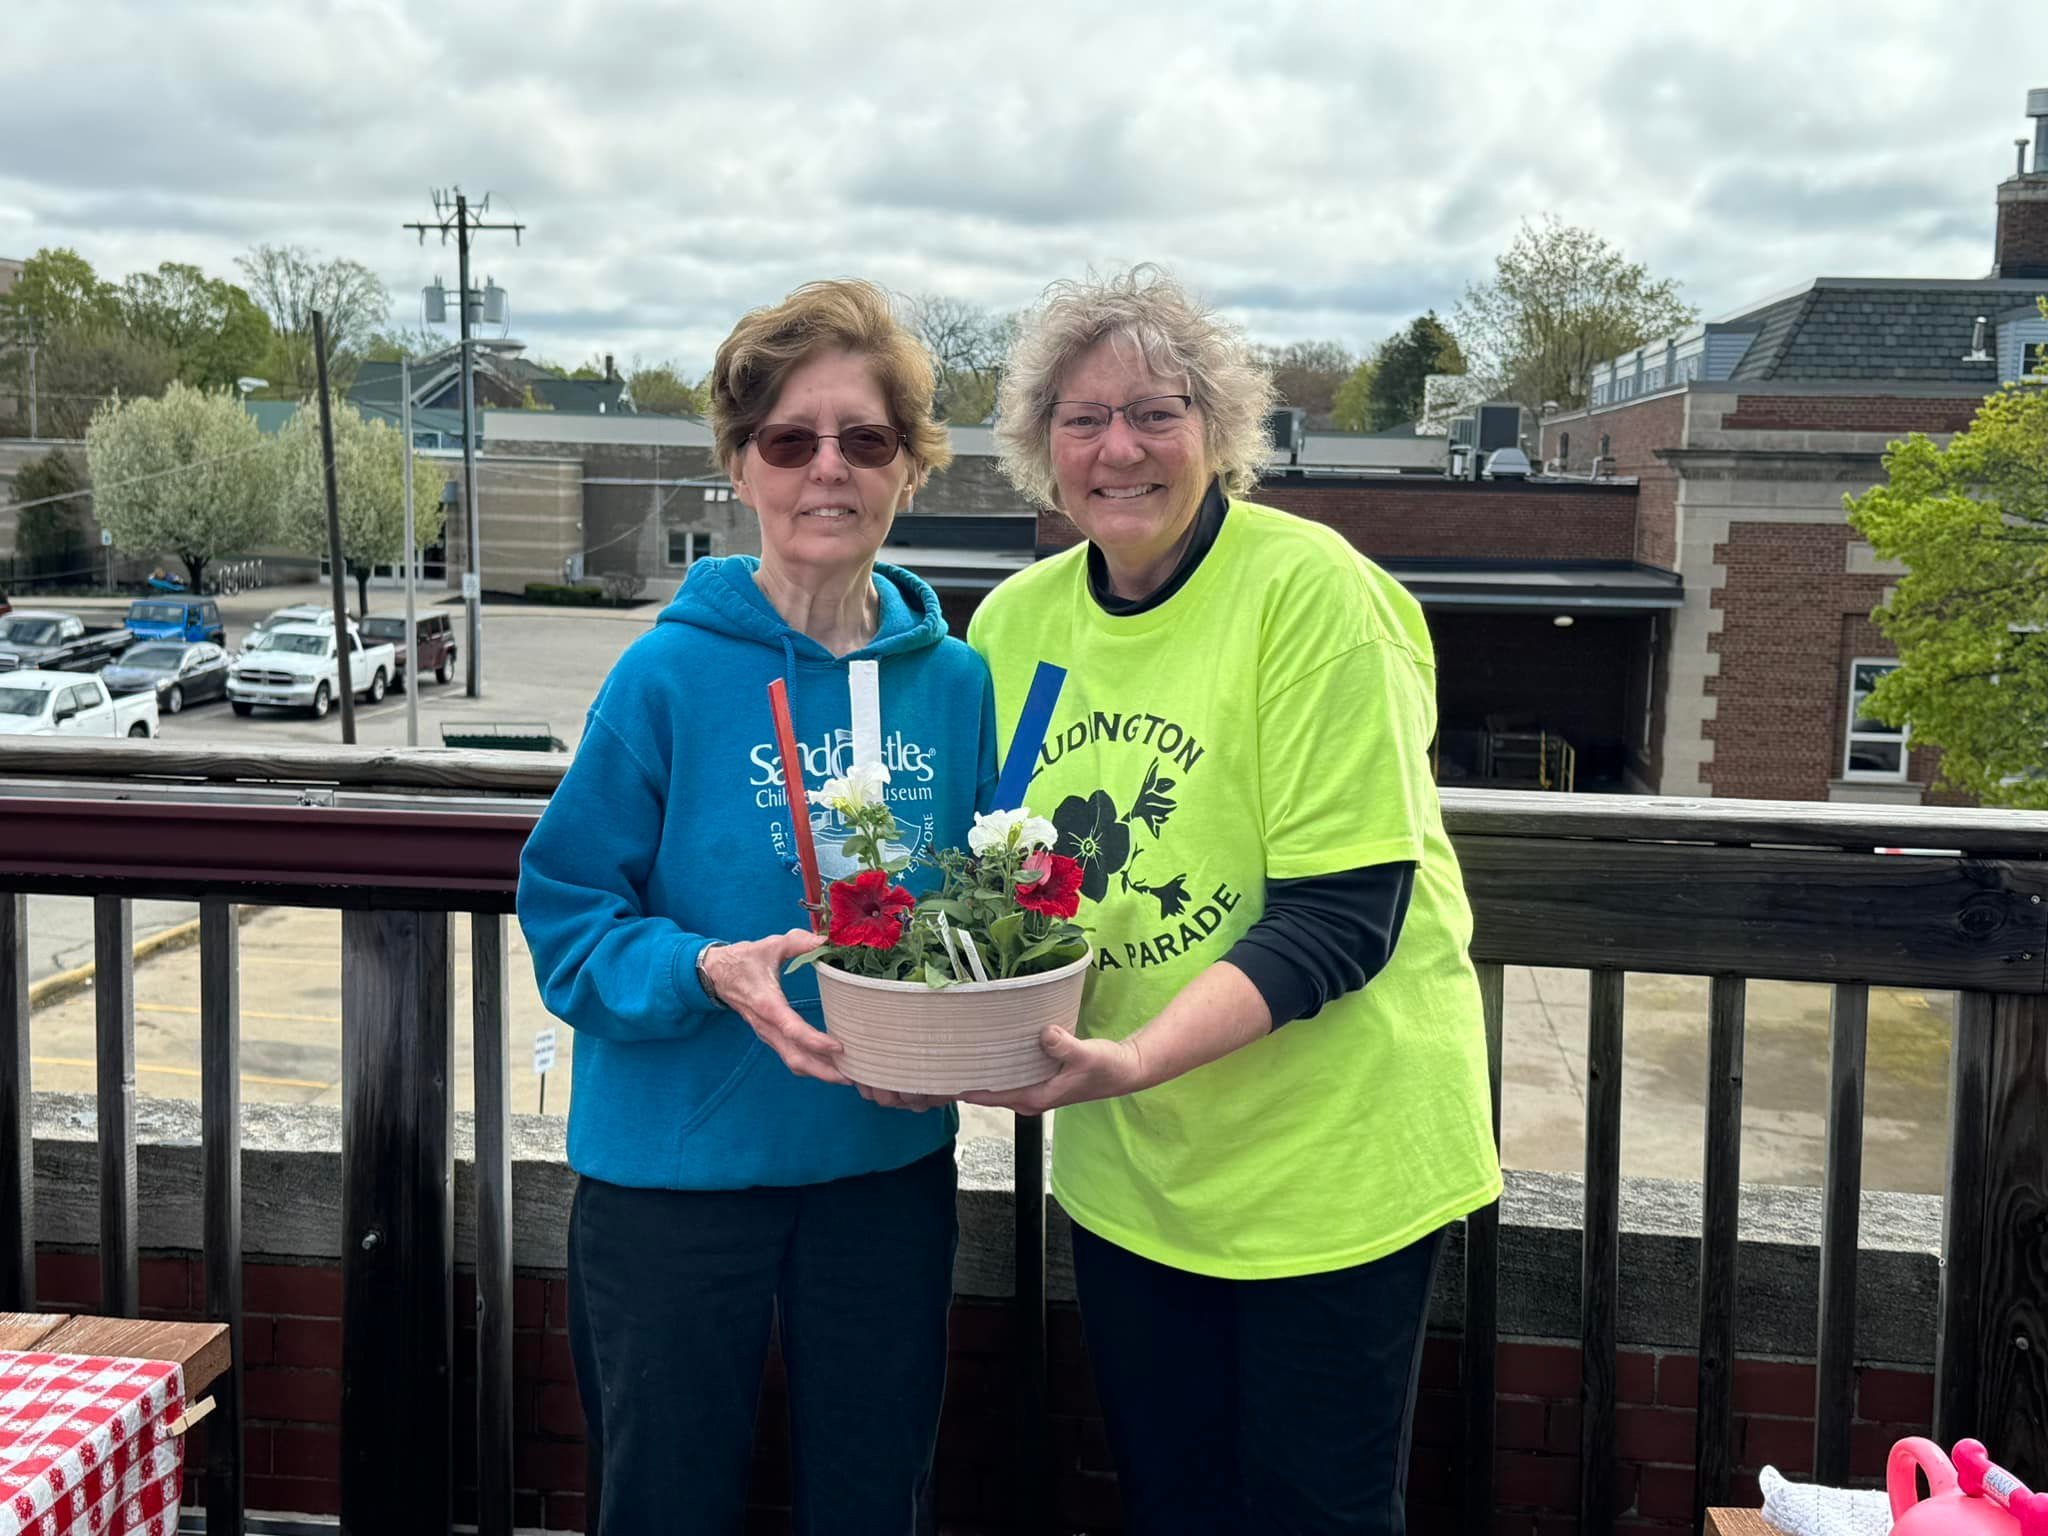 Thank you Kathy Radke and Mary Lou Ohnsman for planting with the children, and planting Petunia&rsquo;s on the top of our deck! They always look so pretty when they bloom!